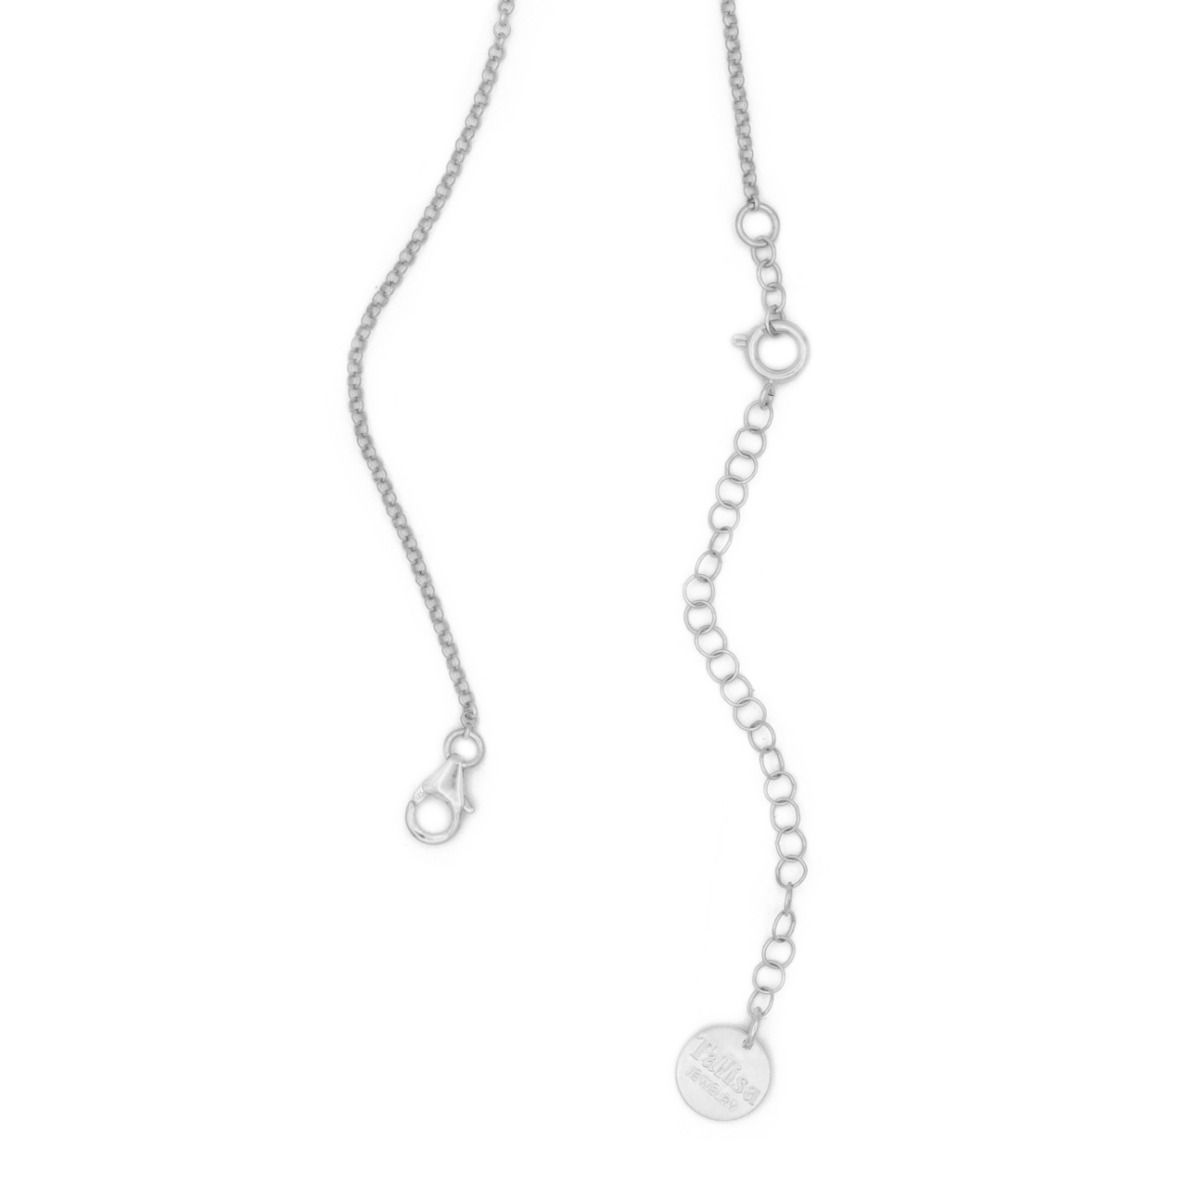 Necklace Extender Chain - 3 inch – Wild Moonstone